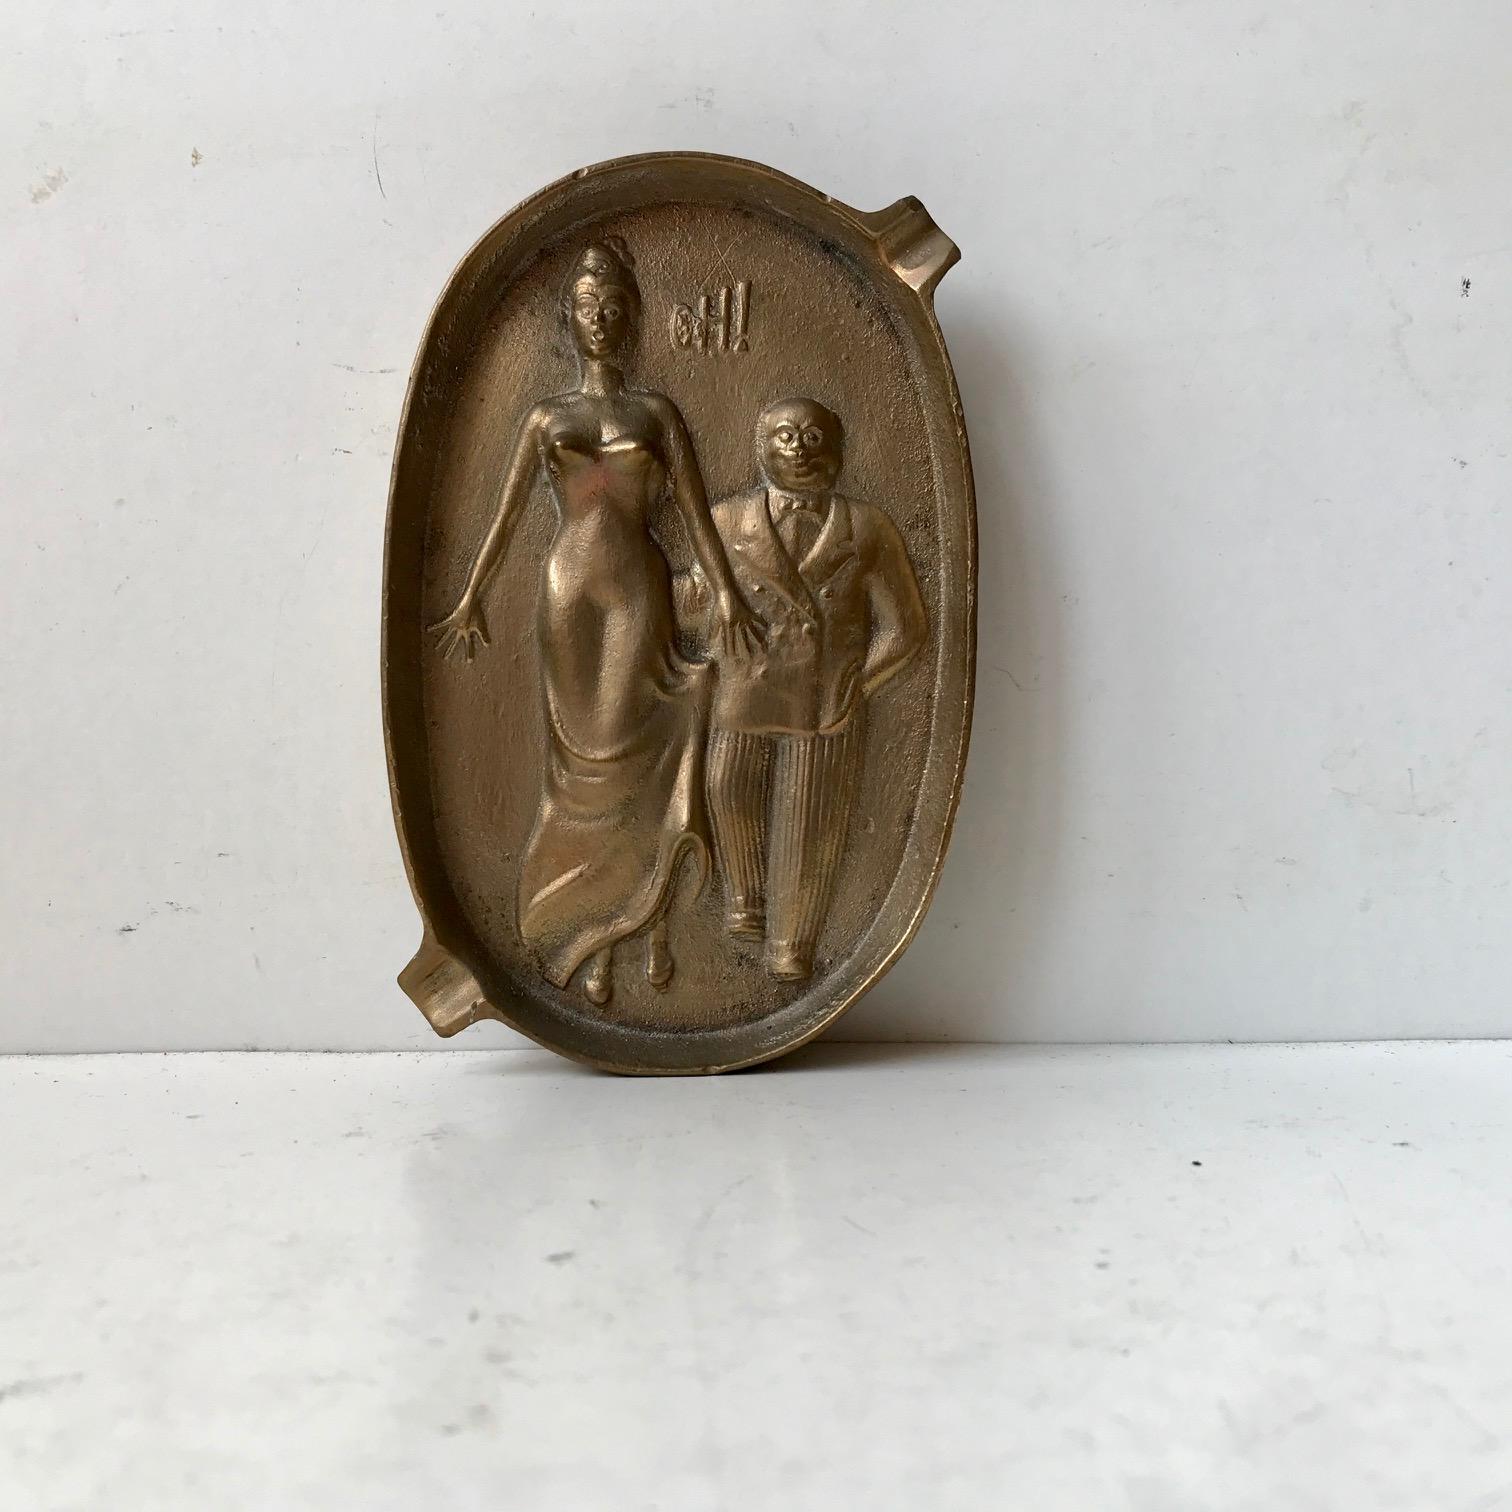 Oval double sided bronze 'ash'- tray featuring a woman exclaiming “Oh!” with two cigarette rests. On the reverse we see that the man has his hand up the woman’s skirt. Manufactured in the style of similar pieces made during the Victorian era.